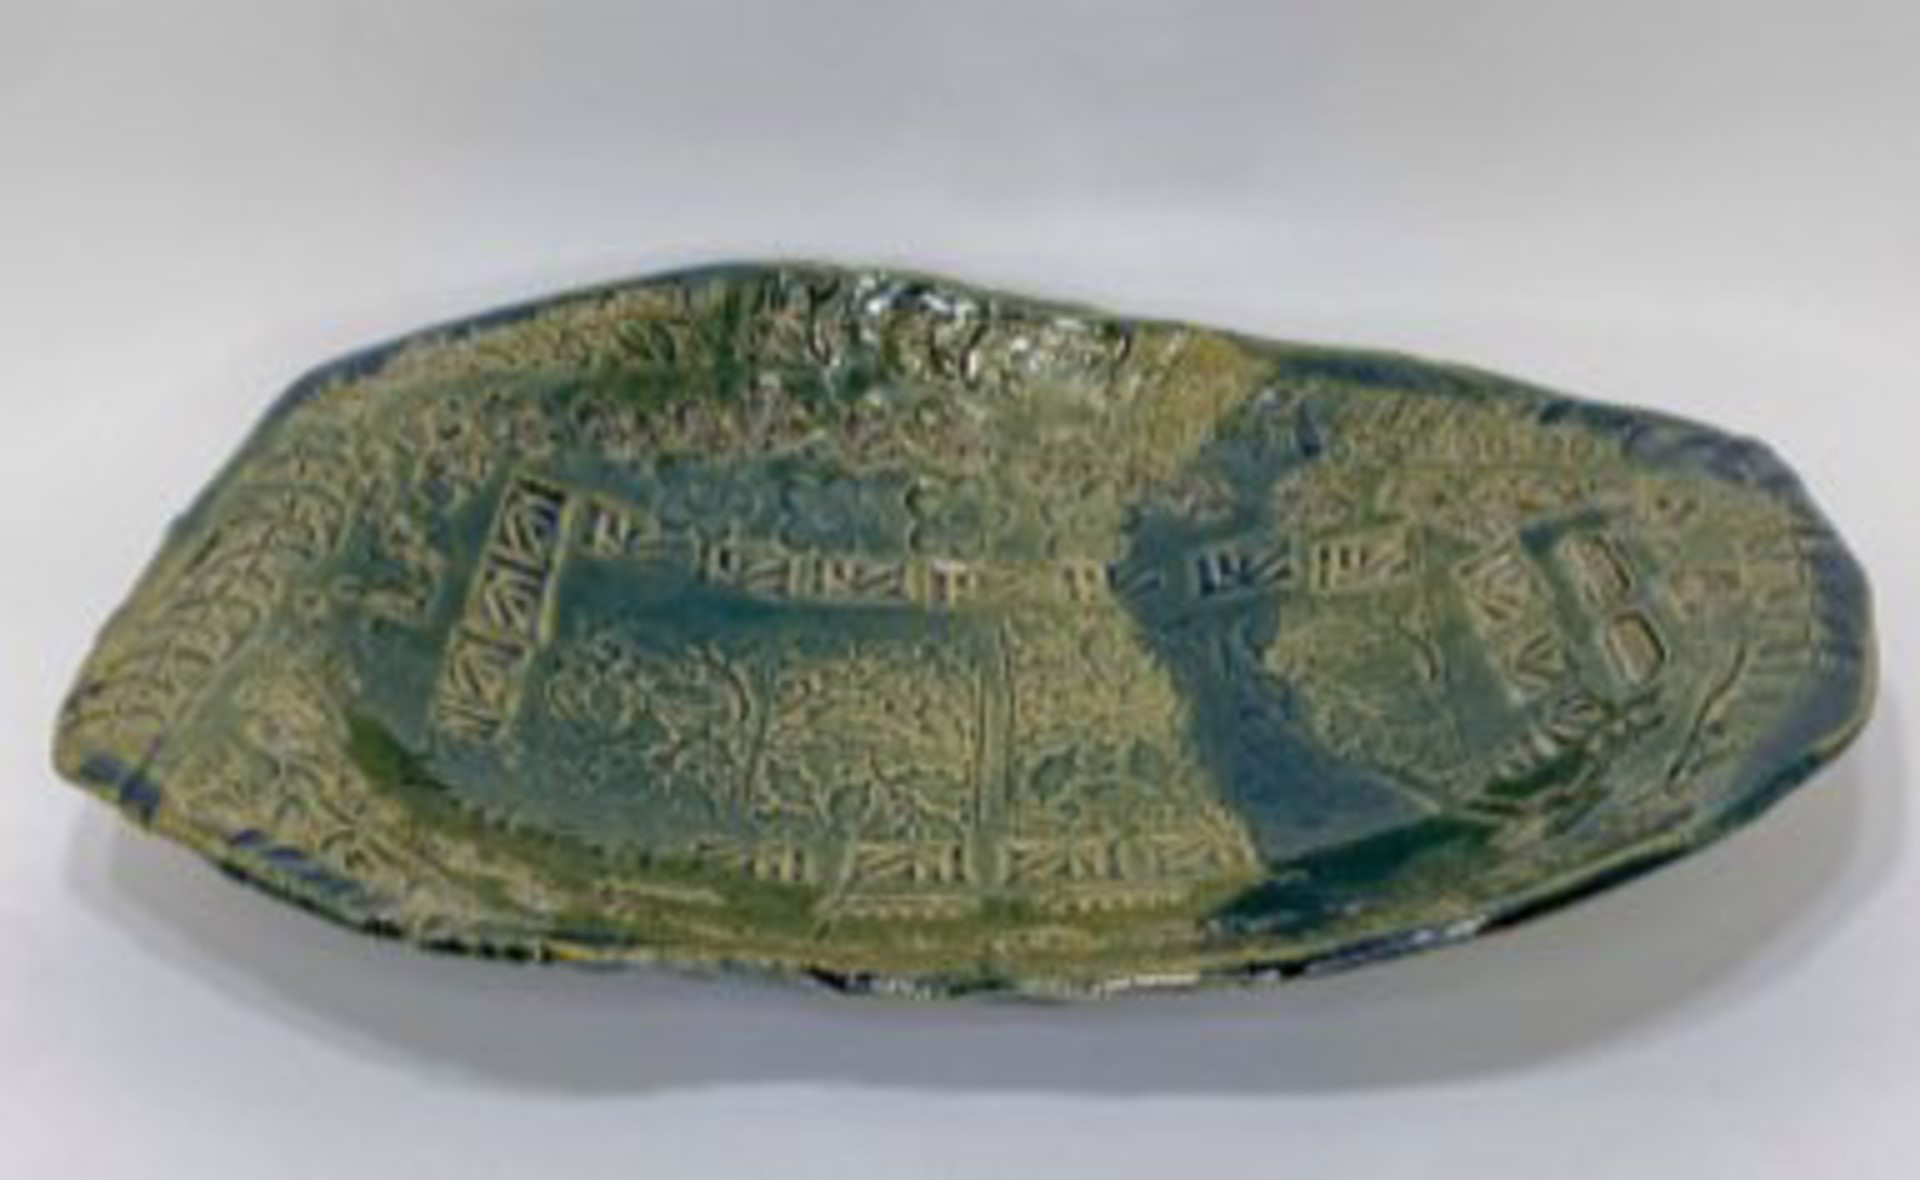 "Large Bowl with Green Floral Stamps" by Tyler by One Step Beyond Group